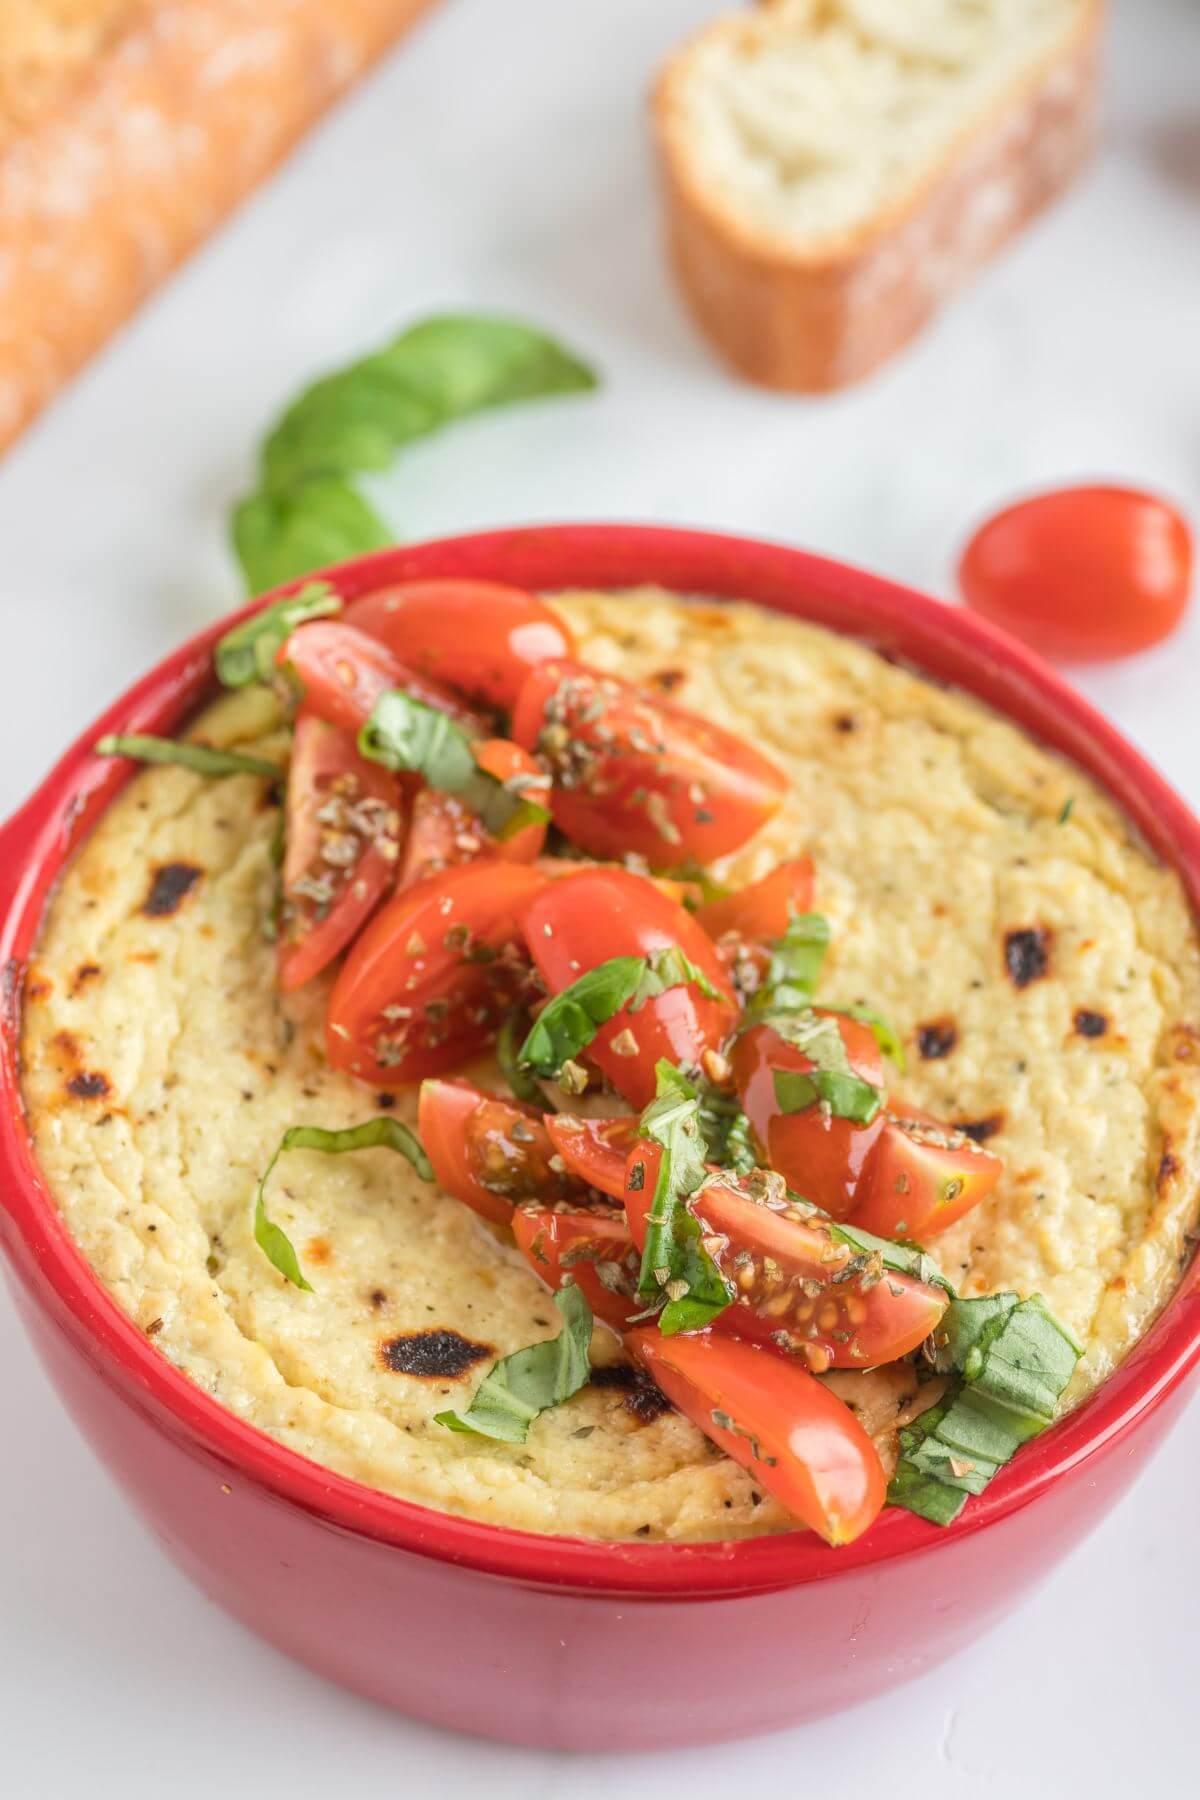 Tomatoes and herbs top a red ramekin full of browned cheese dip.